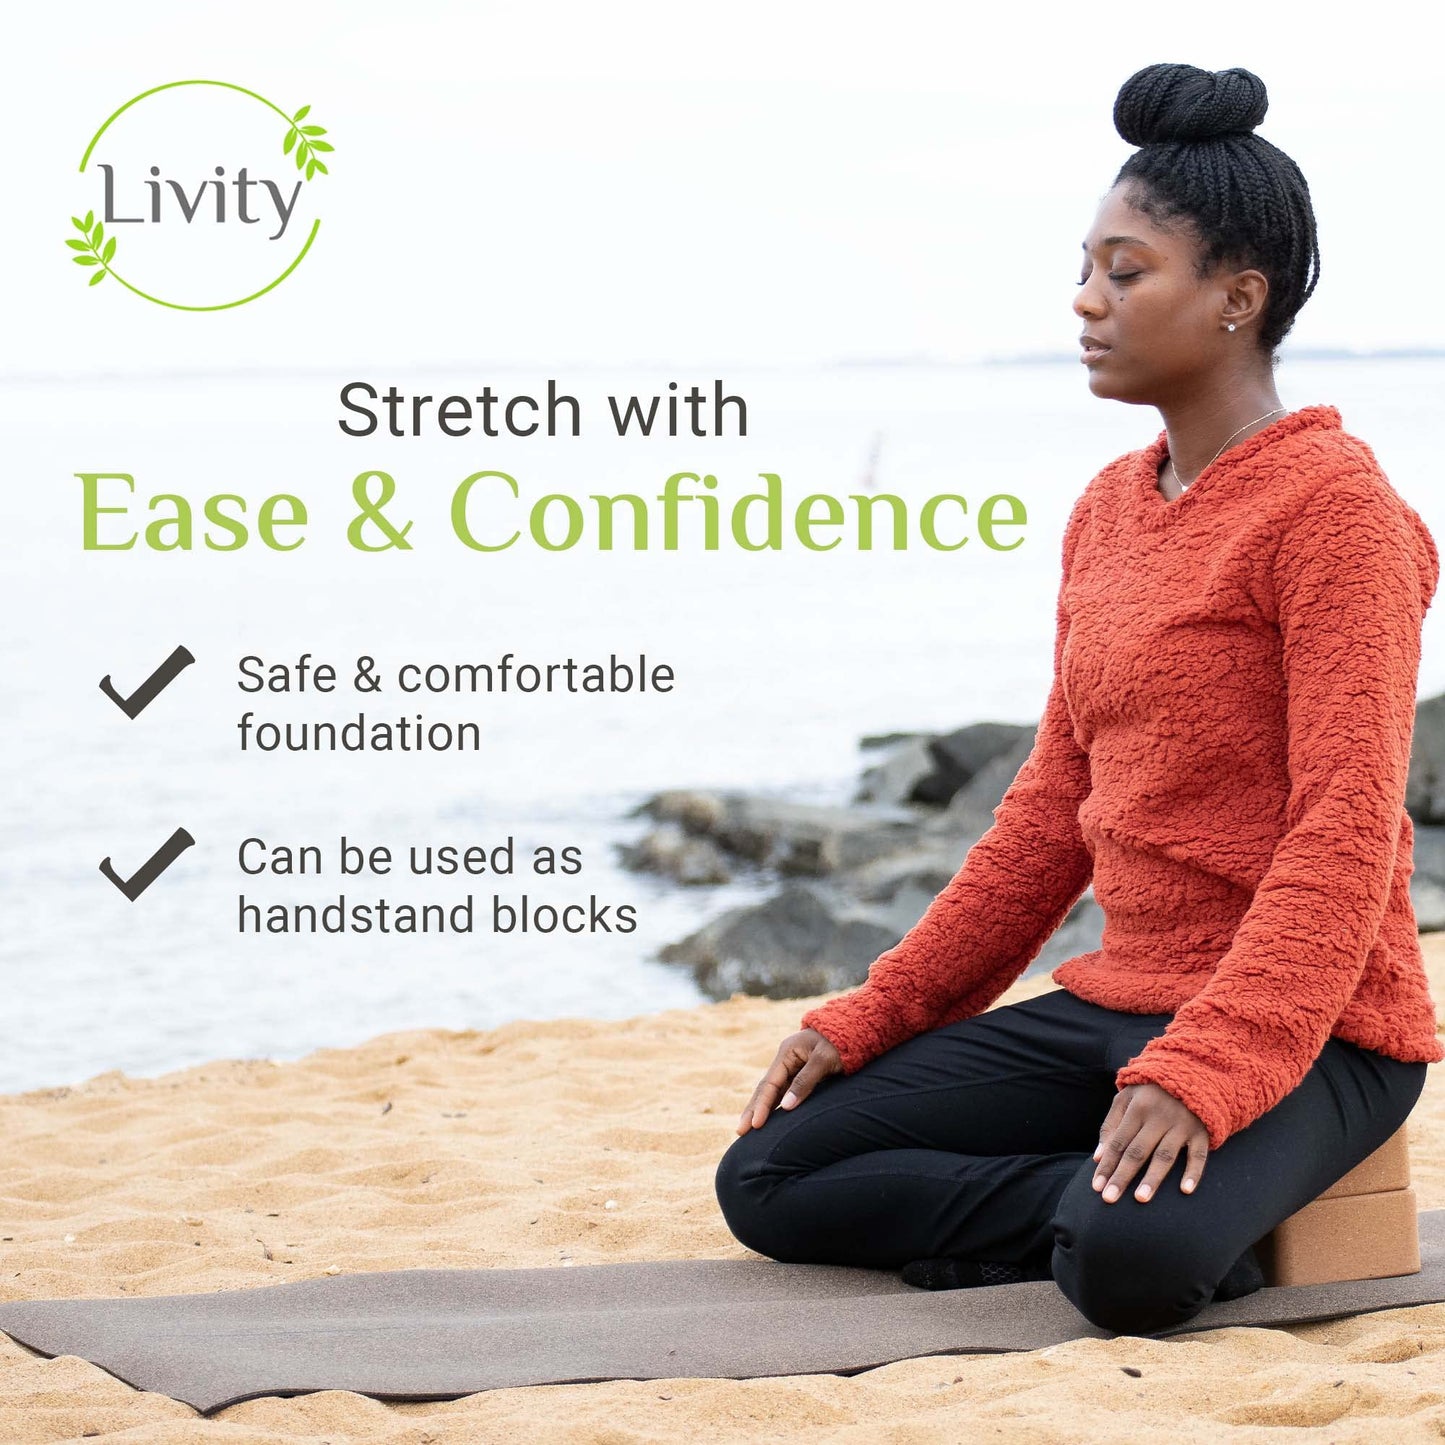 Livity Yoga - Cork Yoga Block, Natural Cork Block, Resilient Cork Exercise Block for Balance and Alignment During Stretching, Pilates, & Meditation, 9 x 6 x 3 inches